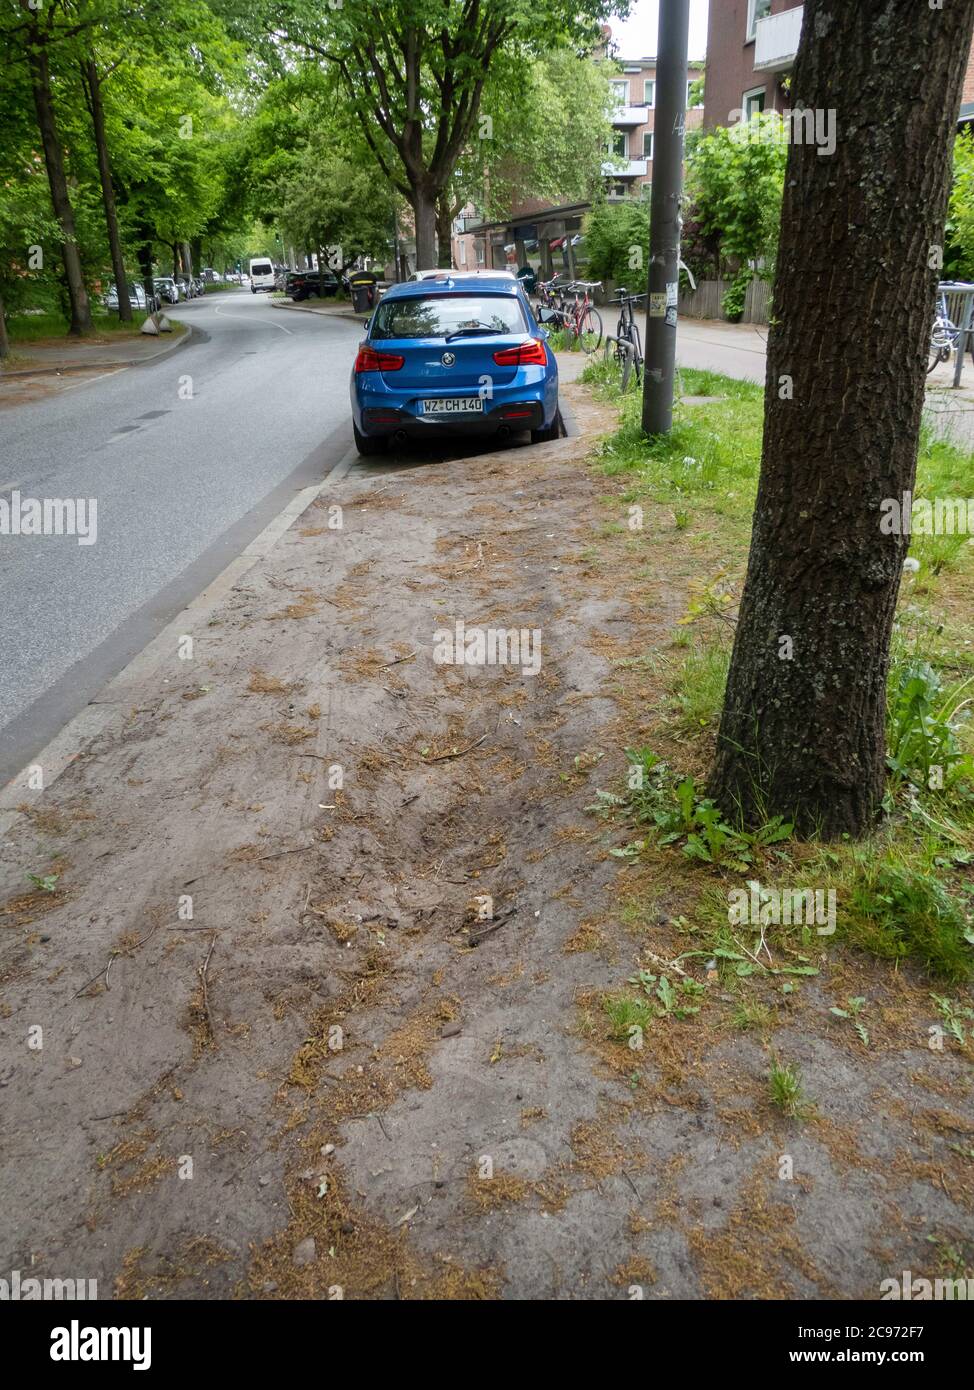 ground compaction from parking cars, Germany, Hamburg Stock Photo